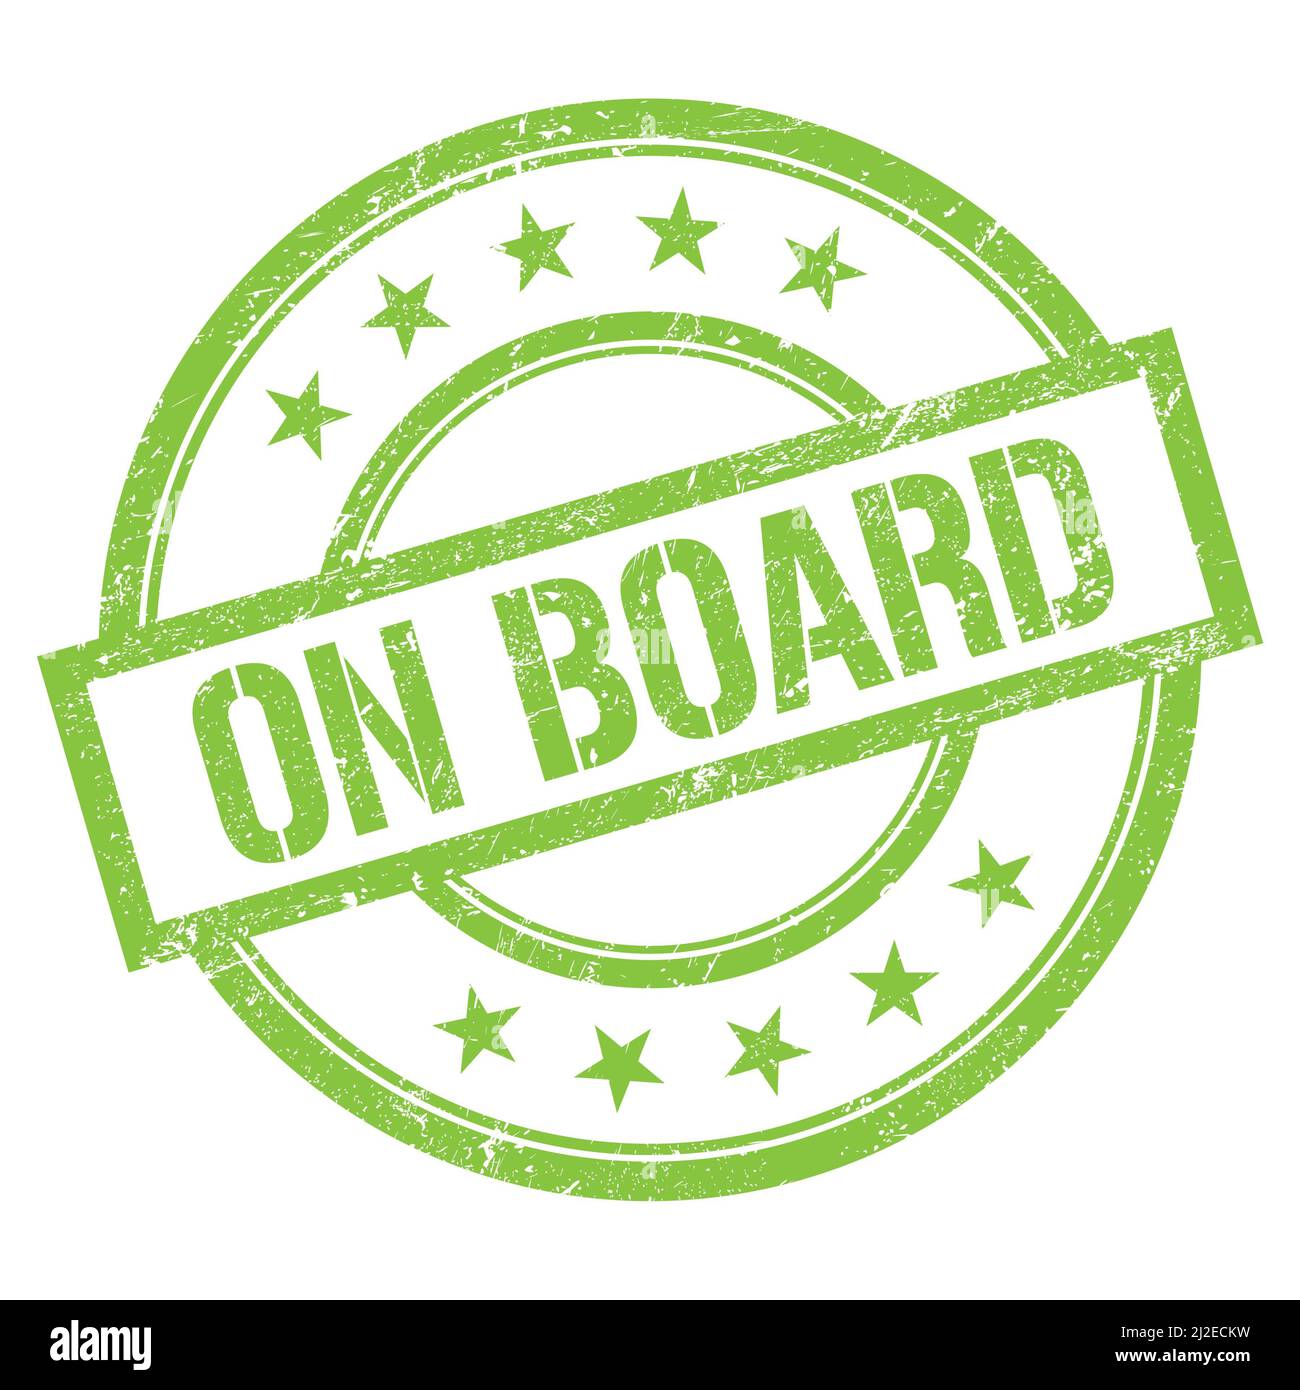 Rubber Board Cut Out Stock Images & Pictures - Alamy